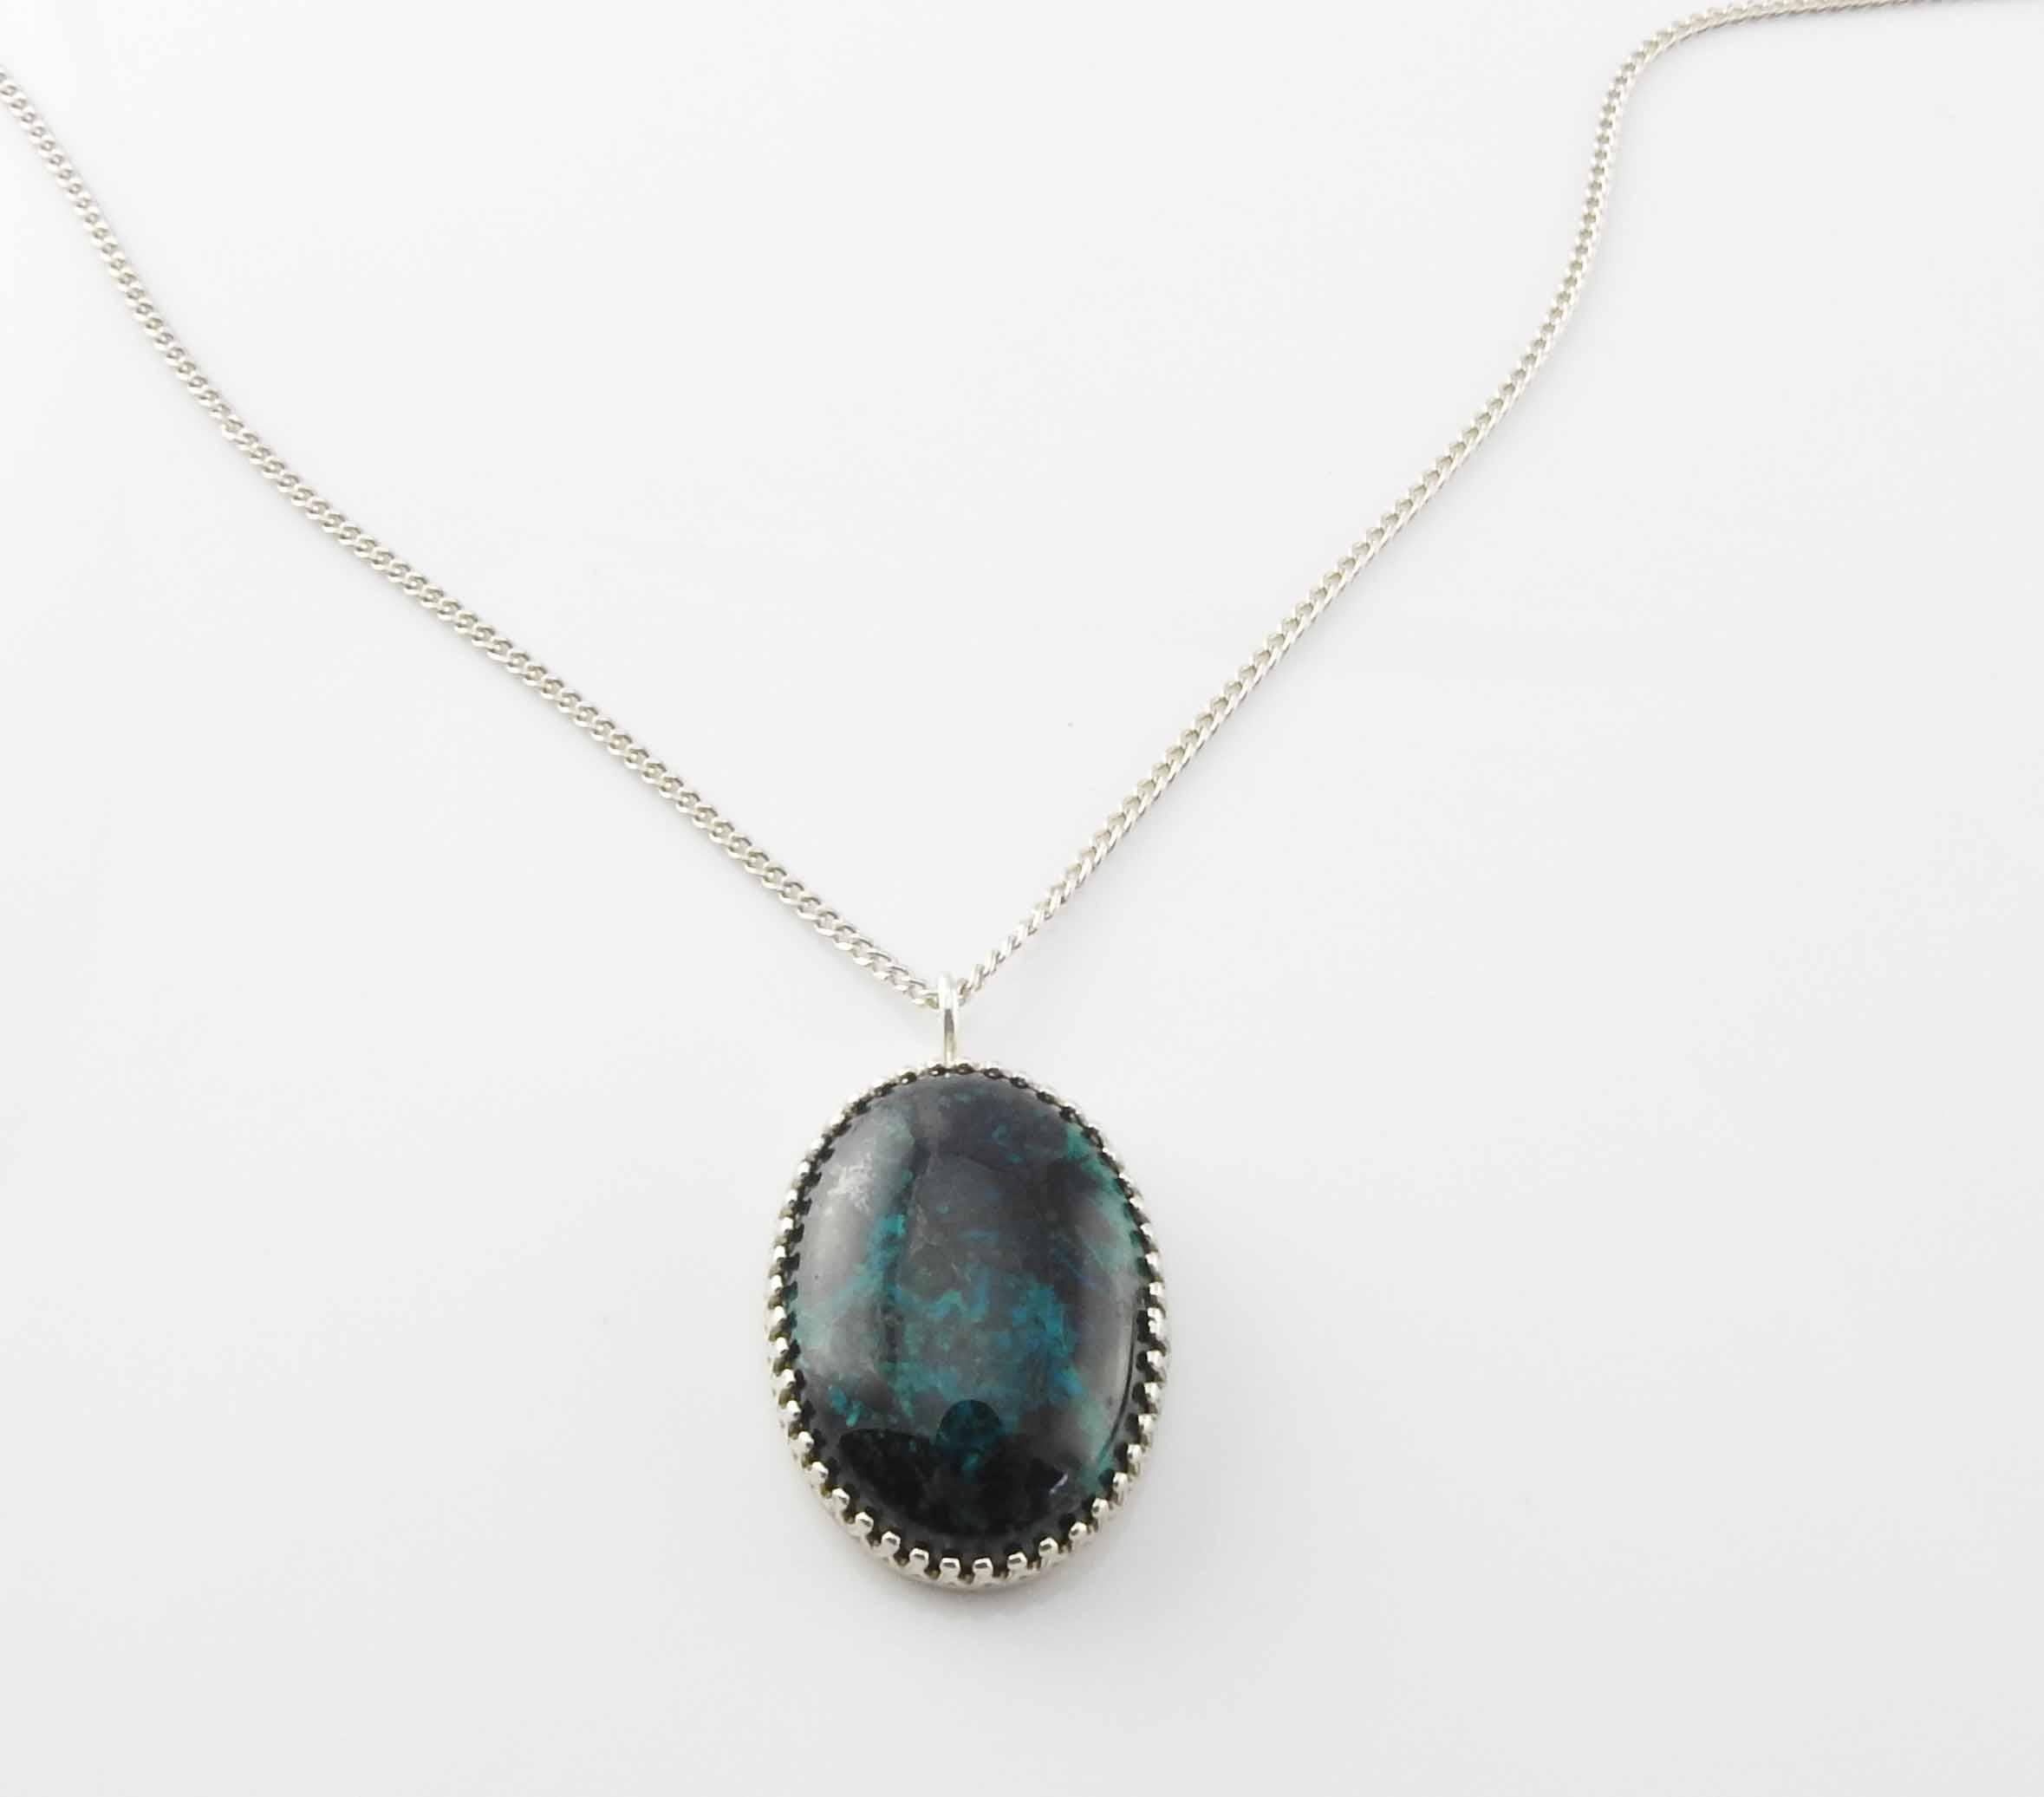 Sterling silver oval shaped chrysocolla pendant.

Marked: pendant: STERLING.  Chain: CACO STG, Sterling on clasp

Measures: 18 1/4